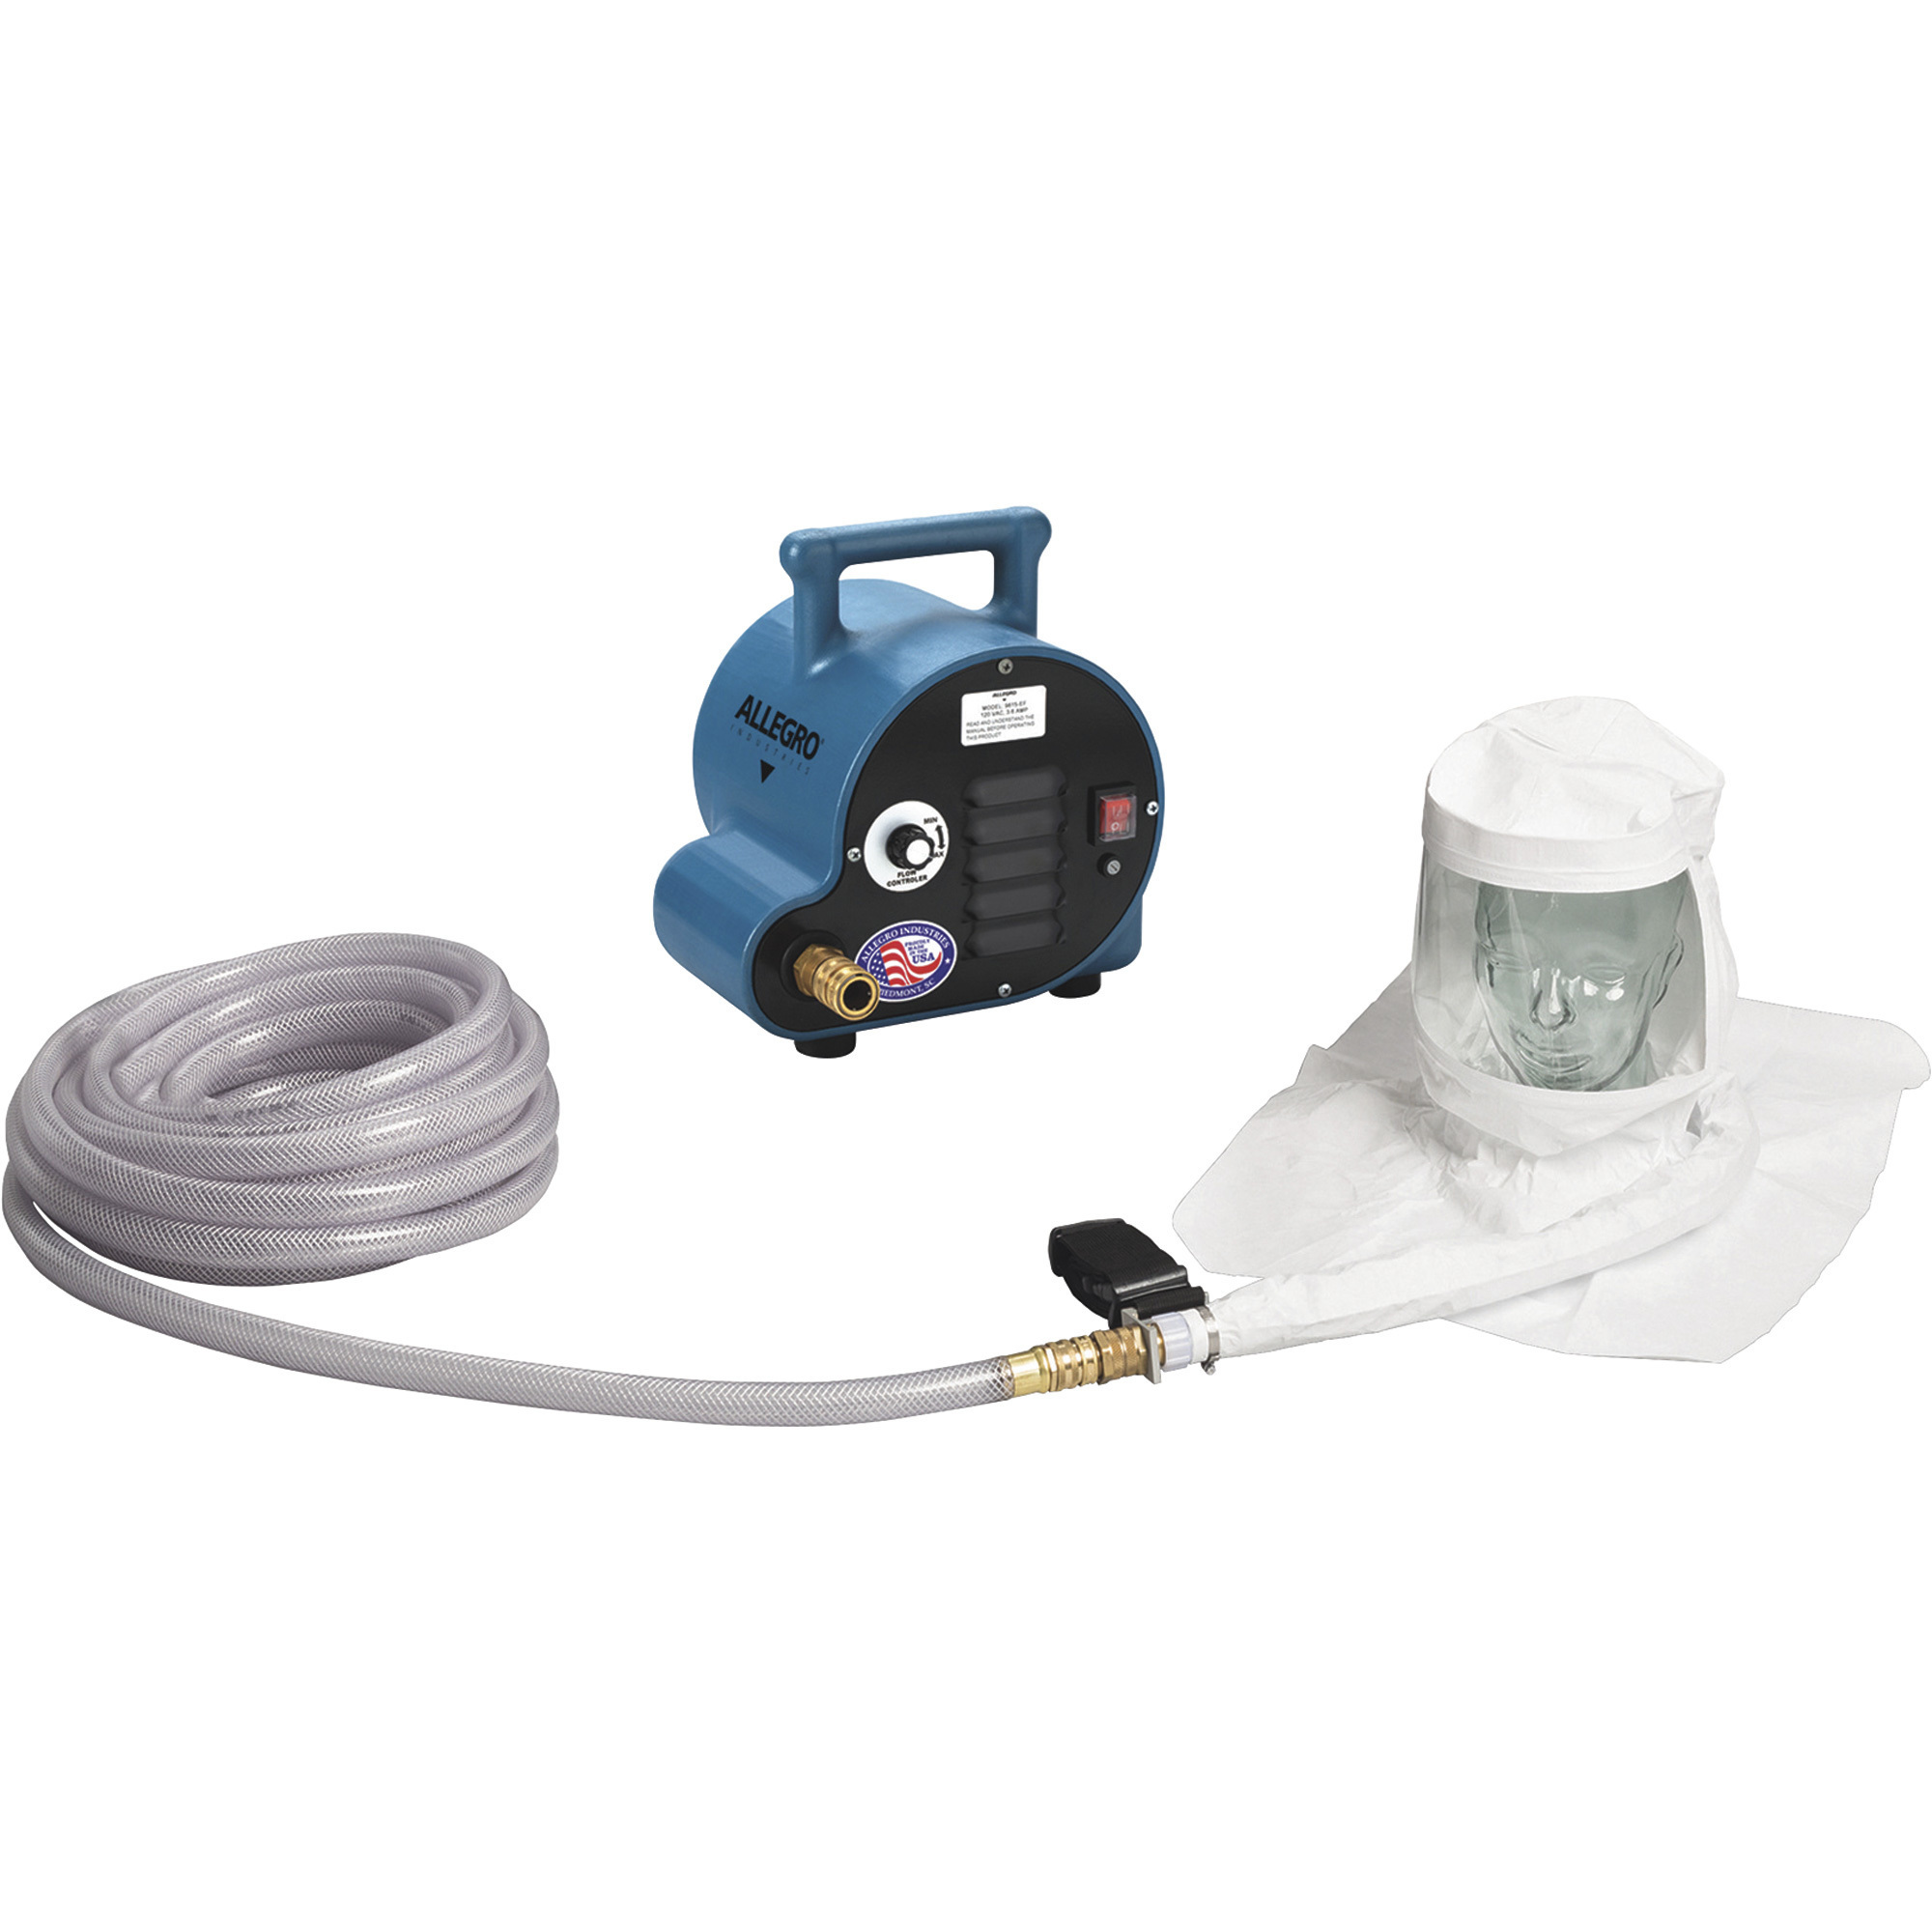 Allegro One Worker Single Bib Hood Respirator System, One Blower, One 50ft. Breathing Air Tube, Model 9221-01A